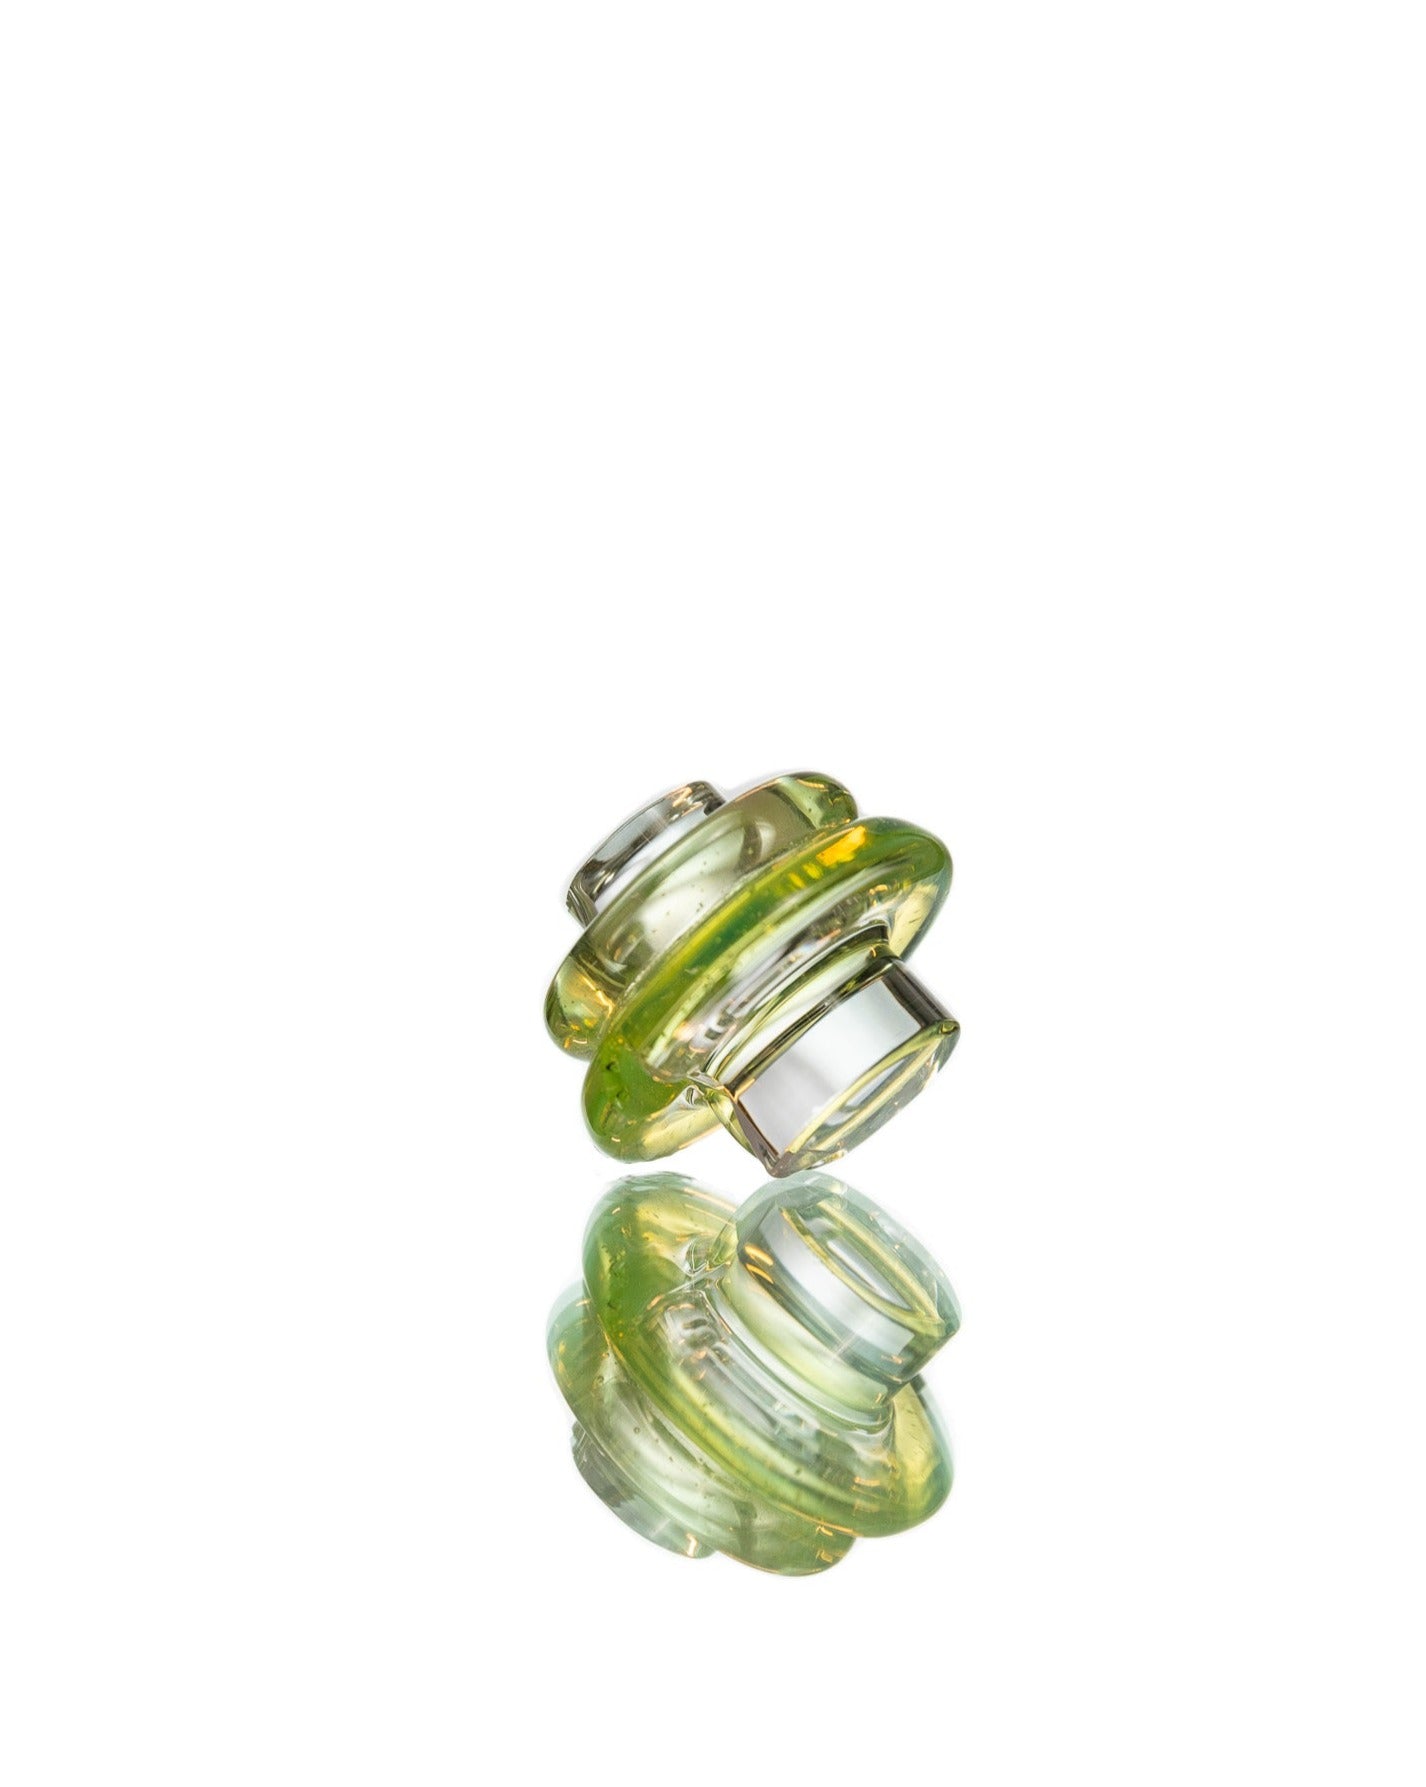 One Trick Pony - "Green Slyme" Multipass "Rockulus" Spinner Cap